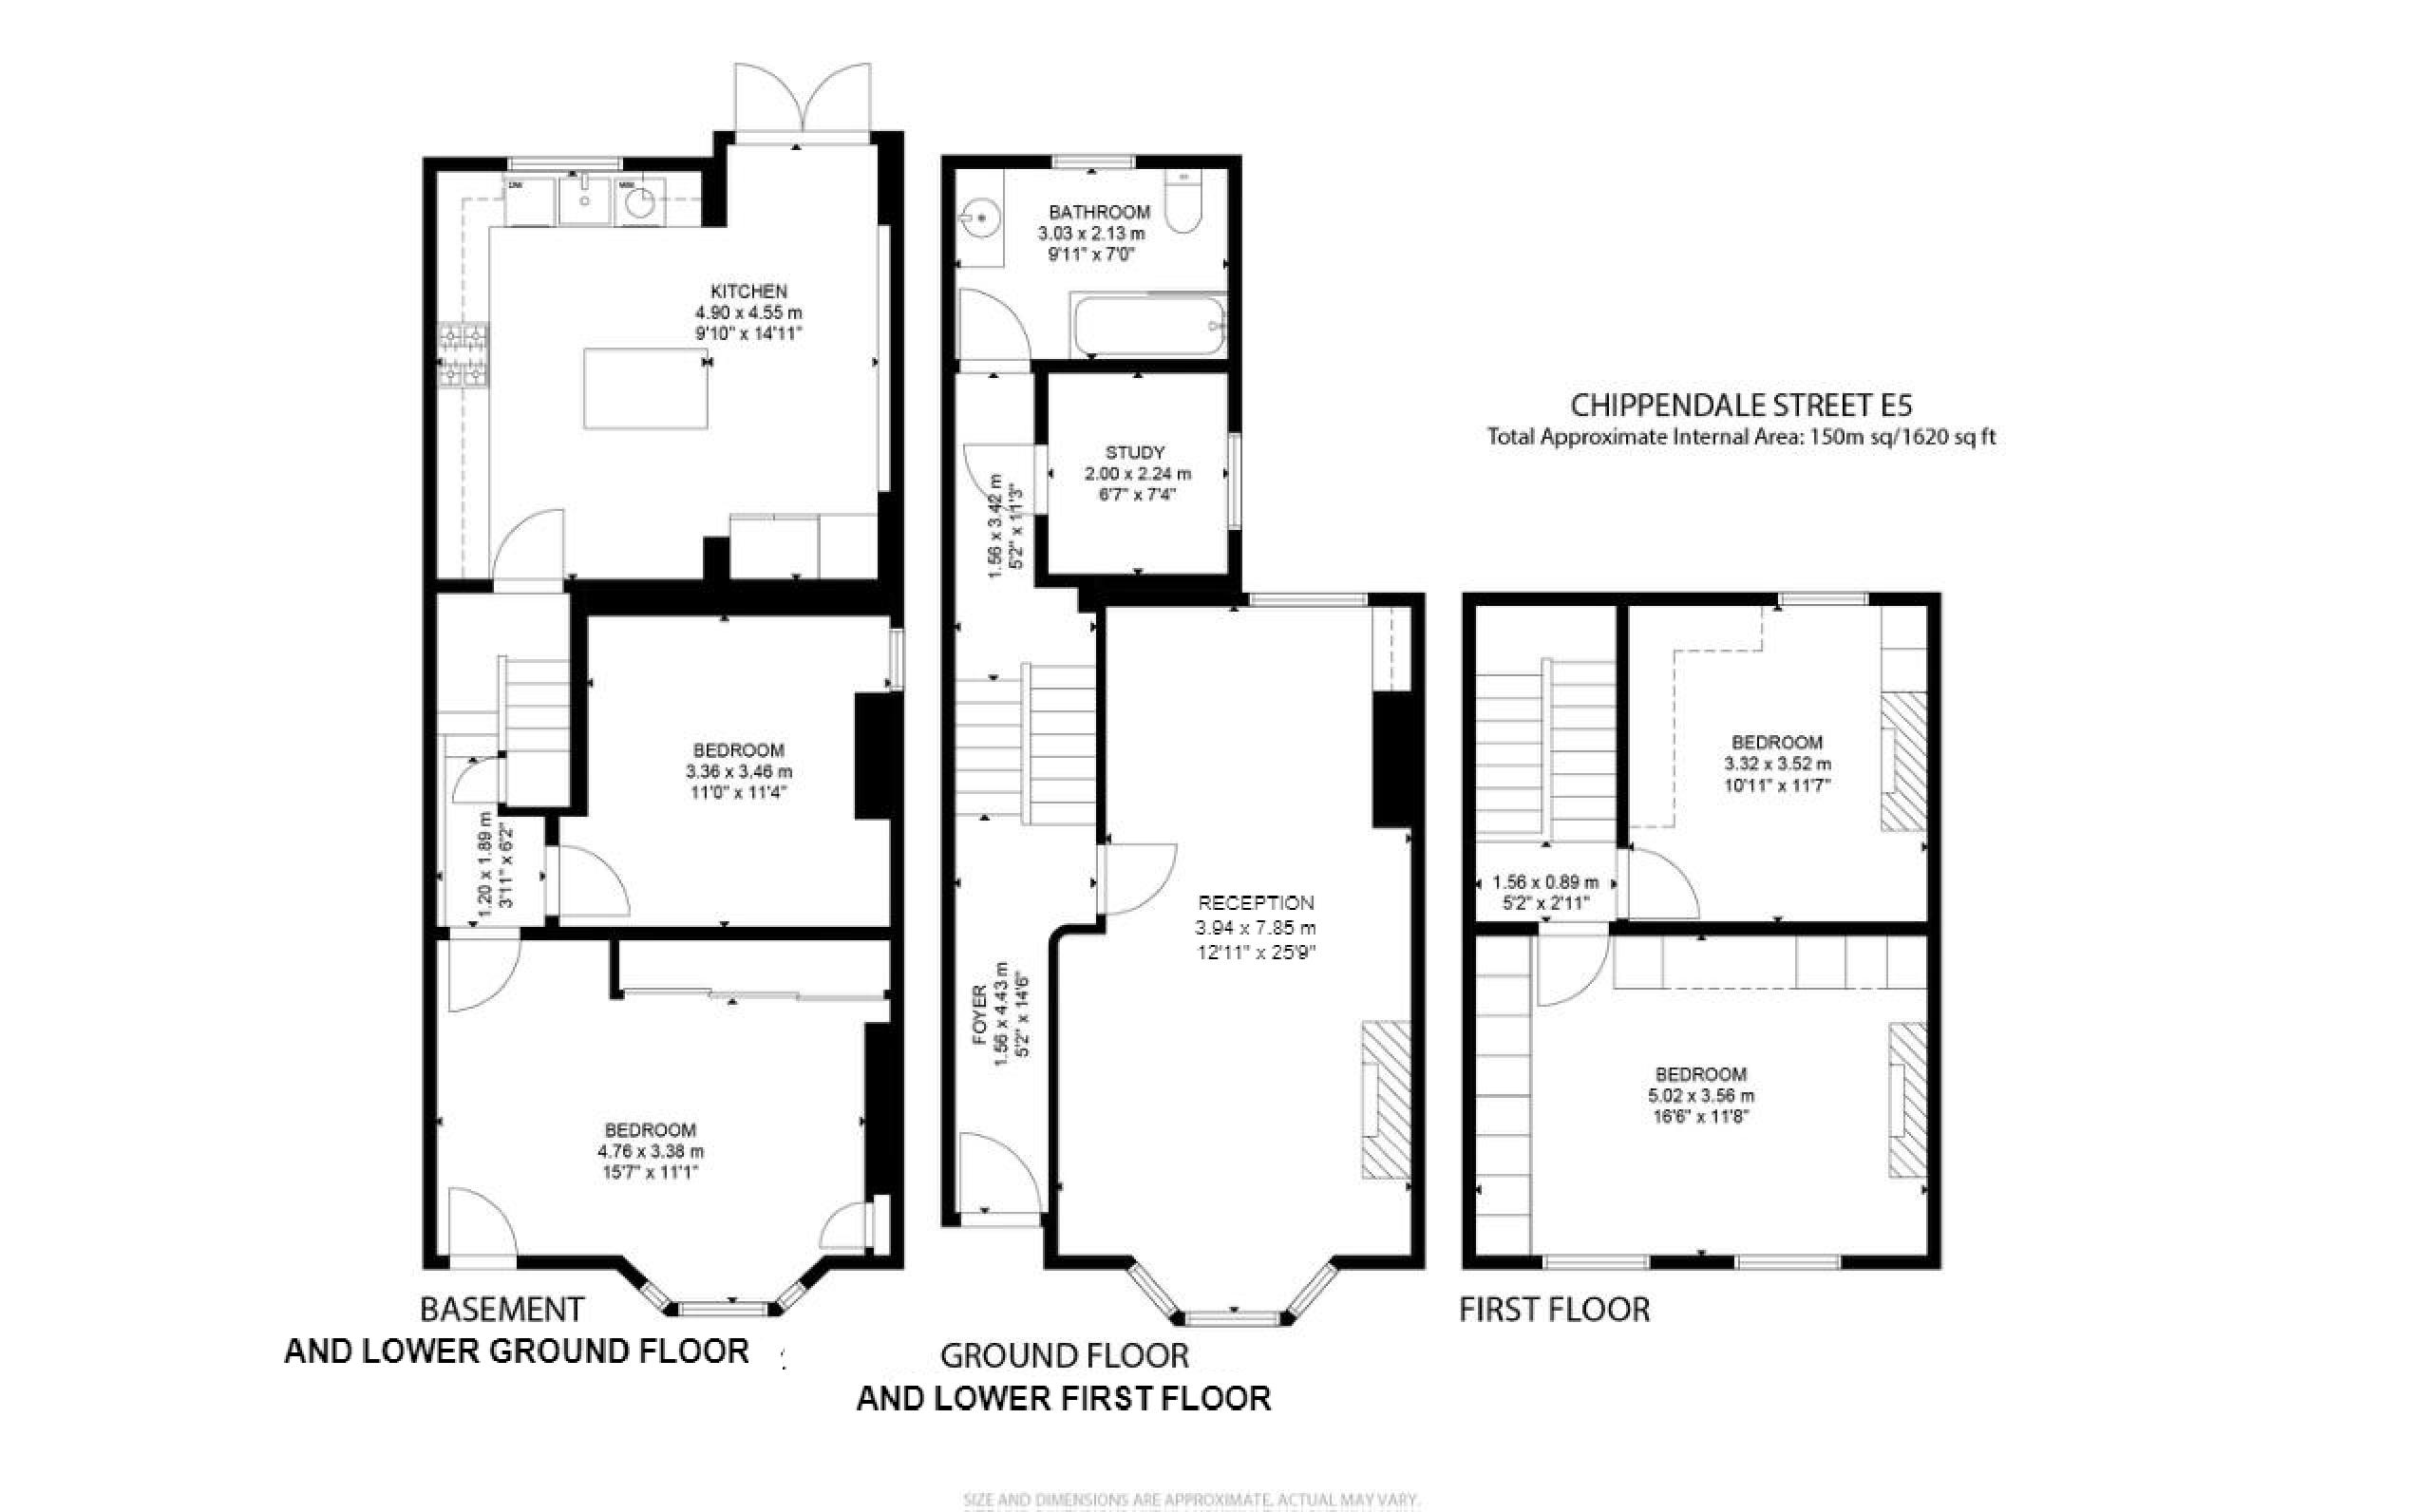 4 bed end of terrace house for sale in Chippendale Street, Hackney - Property floorplan